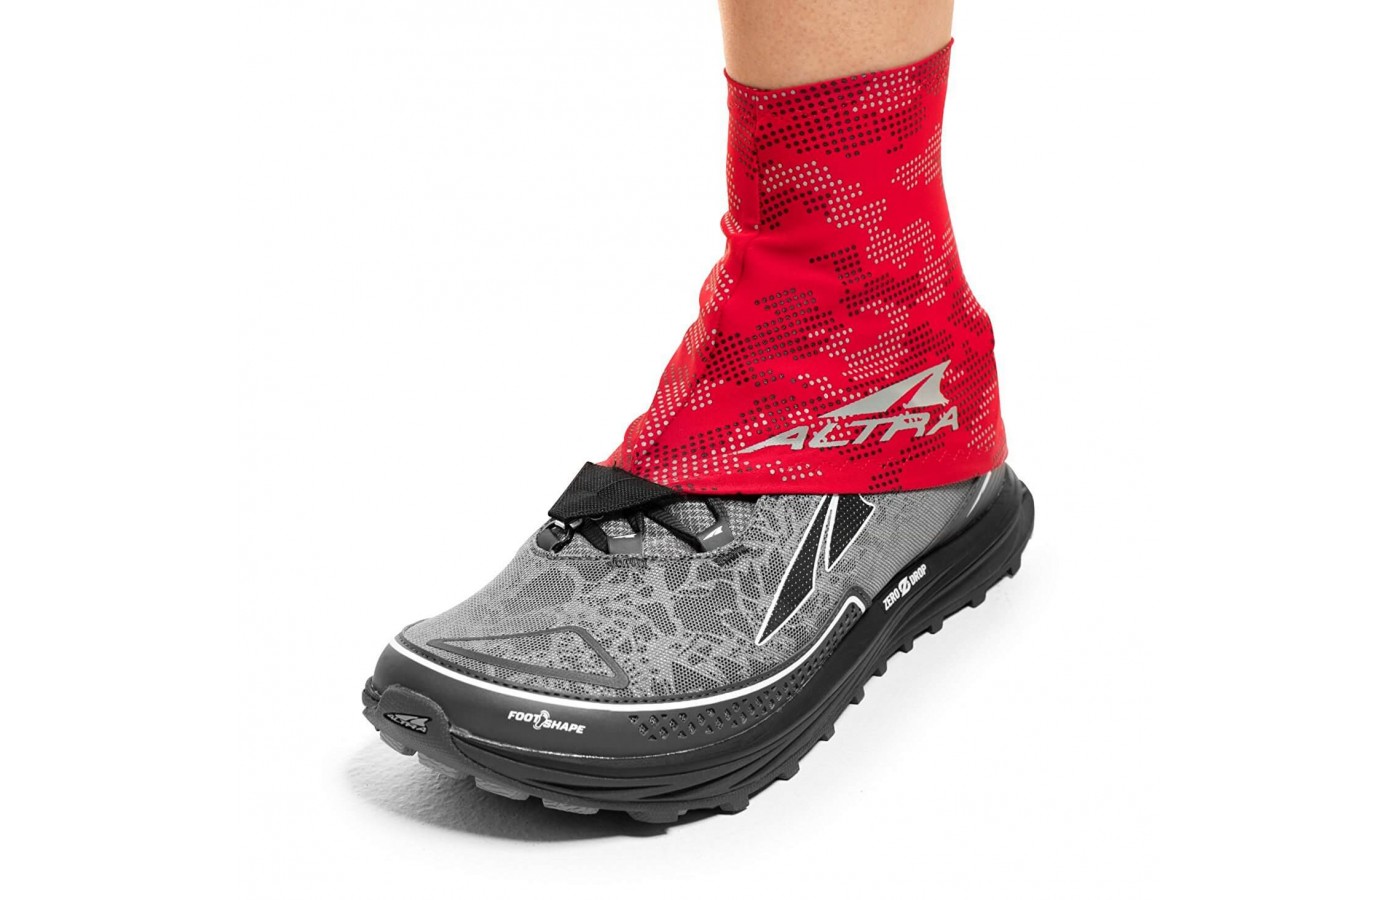 These gaiters come in a variety of colors. 